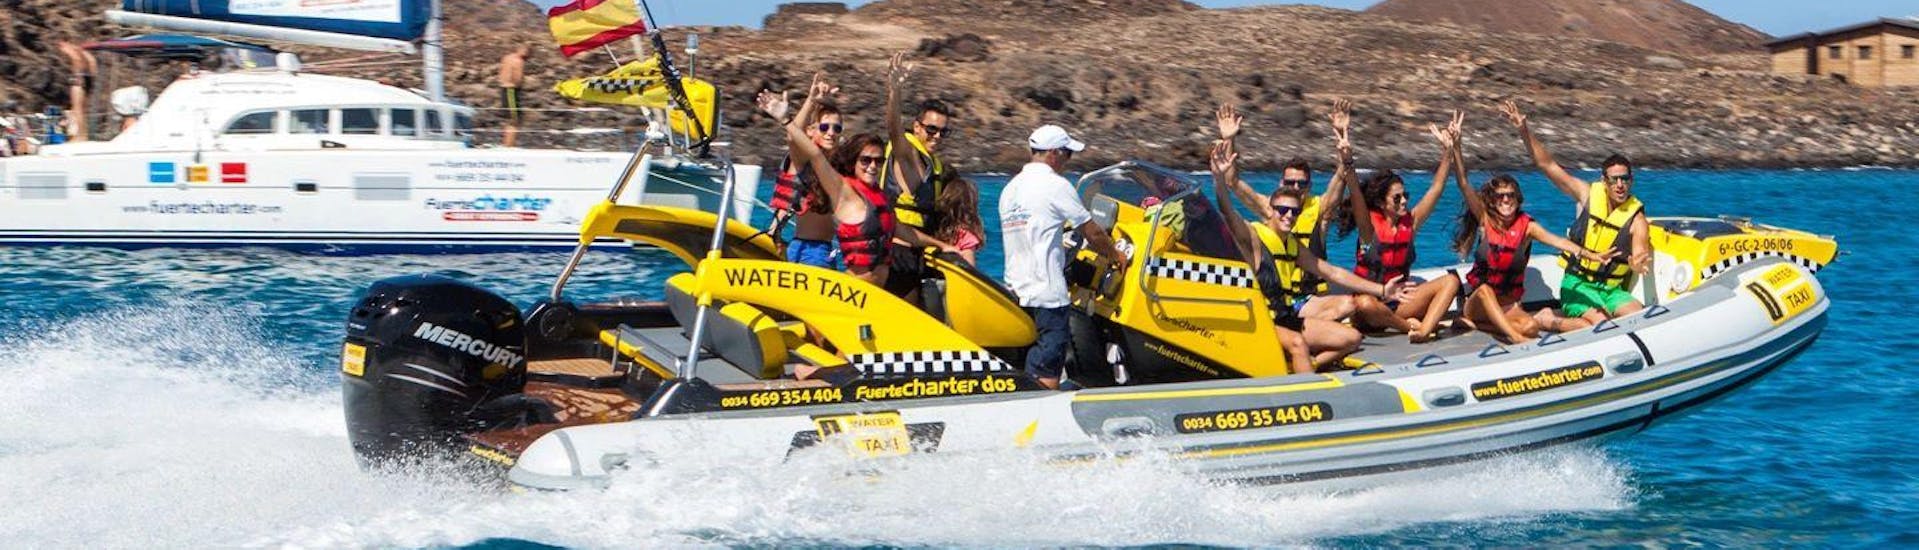 Round Trip Water Taxi from Corralejo to the Lobos Island.